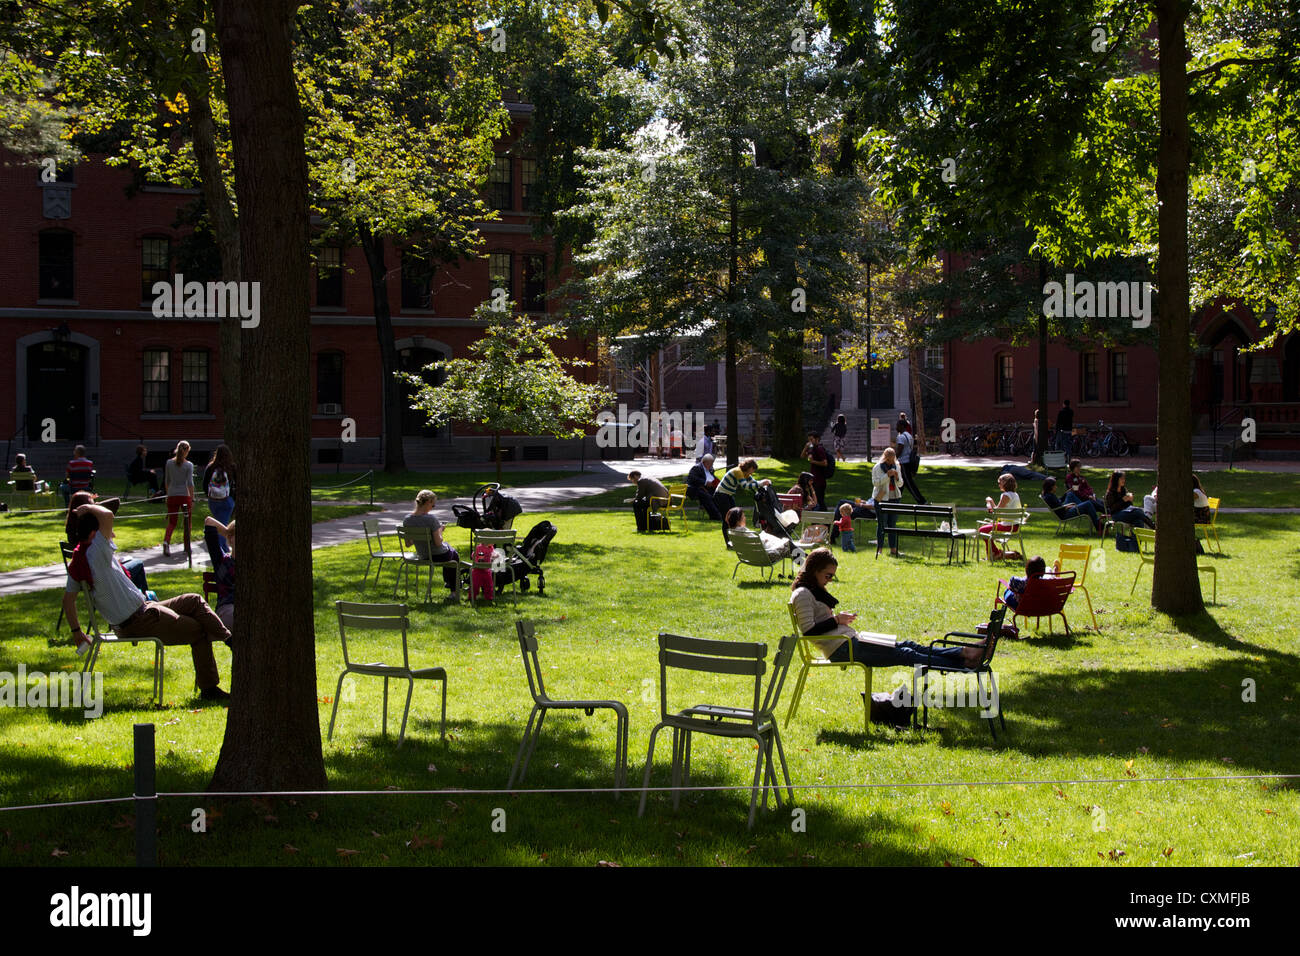 Tourists And Students Rest In Lawn Chairs On A Sunny Afternoon In